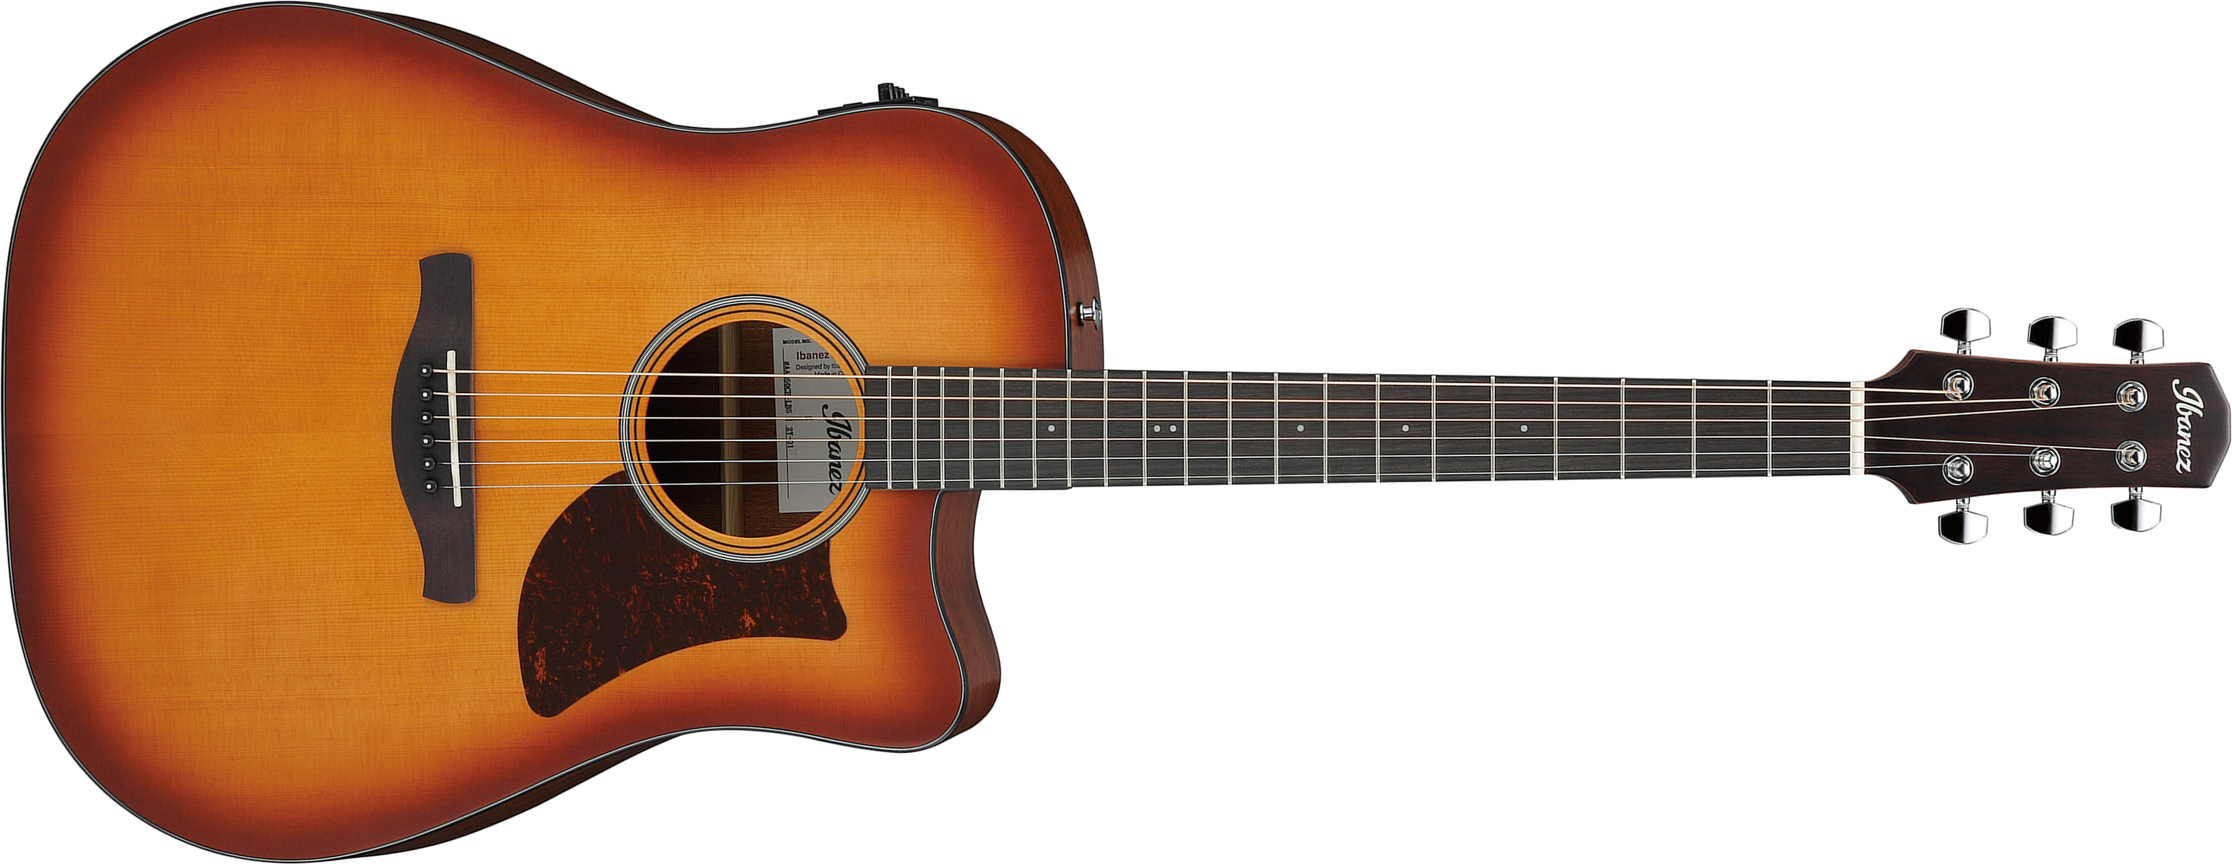 Ibanez Aad50ce Lbs Advanced Dreadnought Cw Epicea Sapele Pur - Light Brown Sunburst Low Gloss - Electro acoustic guitar - Main picture